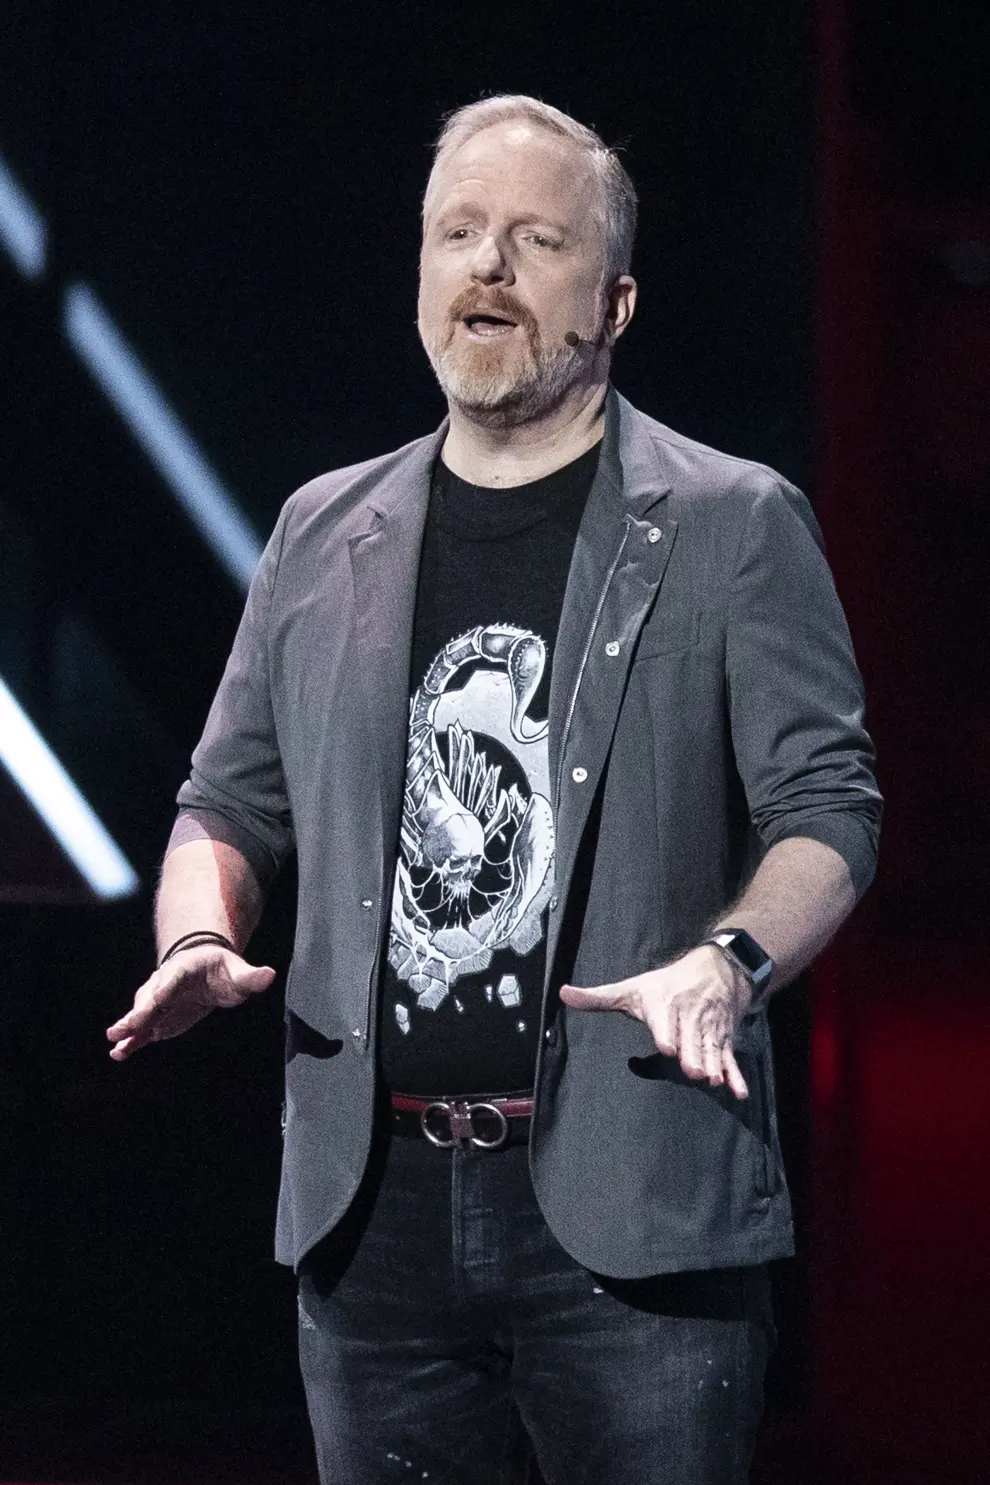 Los Angeles (United States), 09/06/2019.- Studio Head of The Coalition Rod Fergusson delivers a speech during the Microsoft Microsoft Xbox 2019 Briefing at the Microsoft Theater in Los Angeles, California, USA, 09 June 2019. This event occured ahead of the Electronic Entertainment Expo (E3) which runs from 11 to 13 June 2019. (Estados Unidos) EFE/EPA/ETIENNE LAURENT Microsoft XBox 2019 briefing in Los Angeles